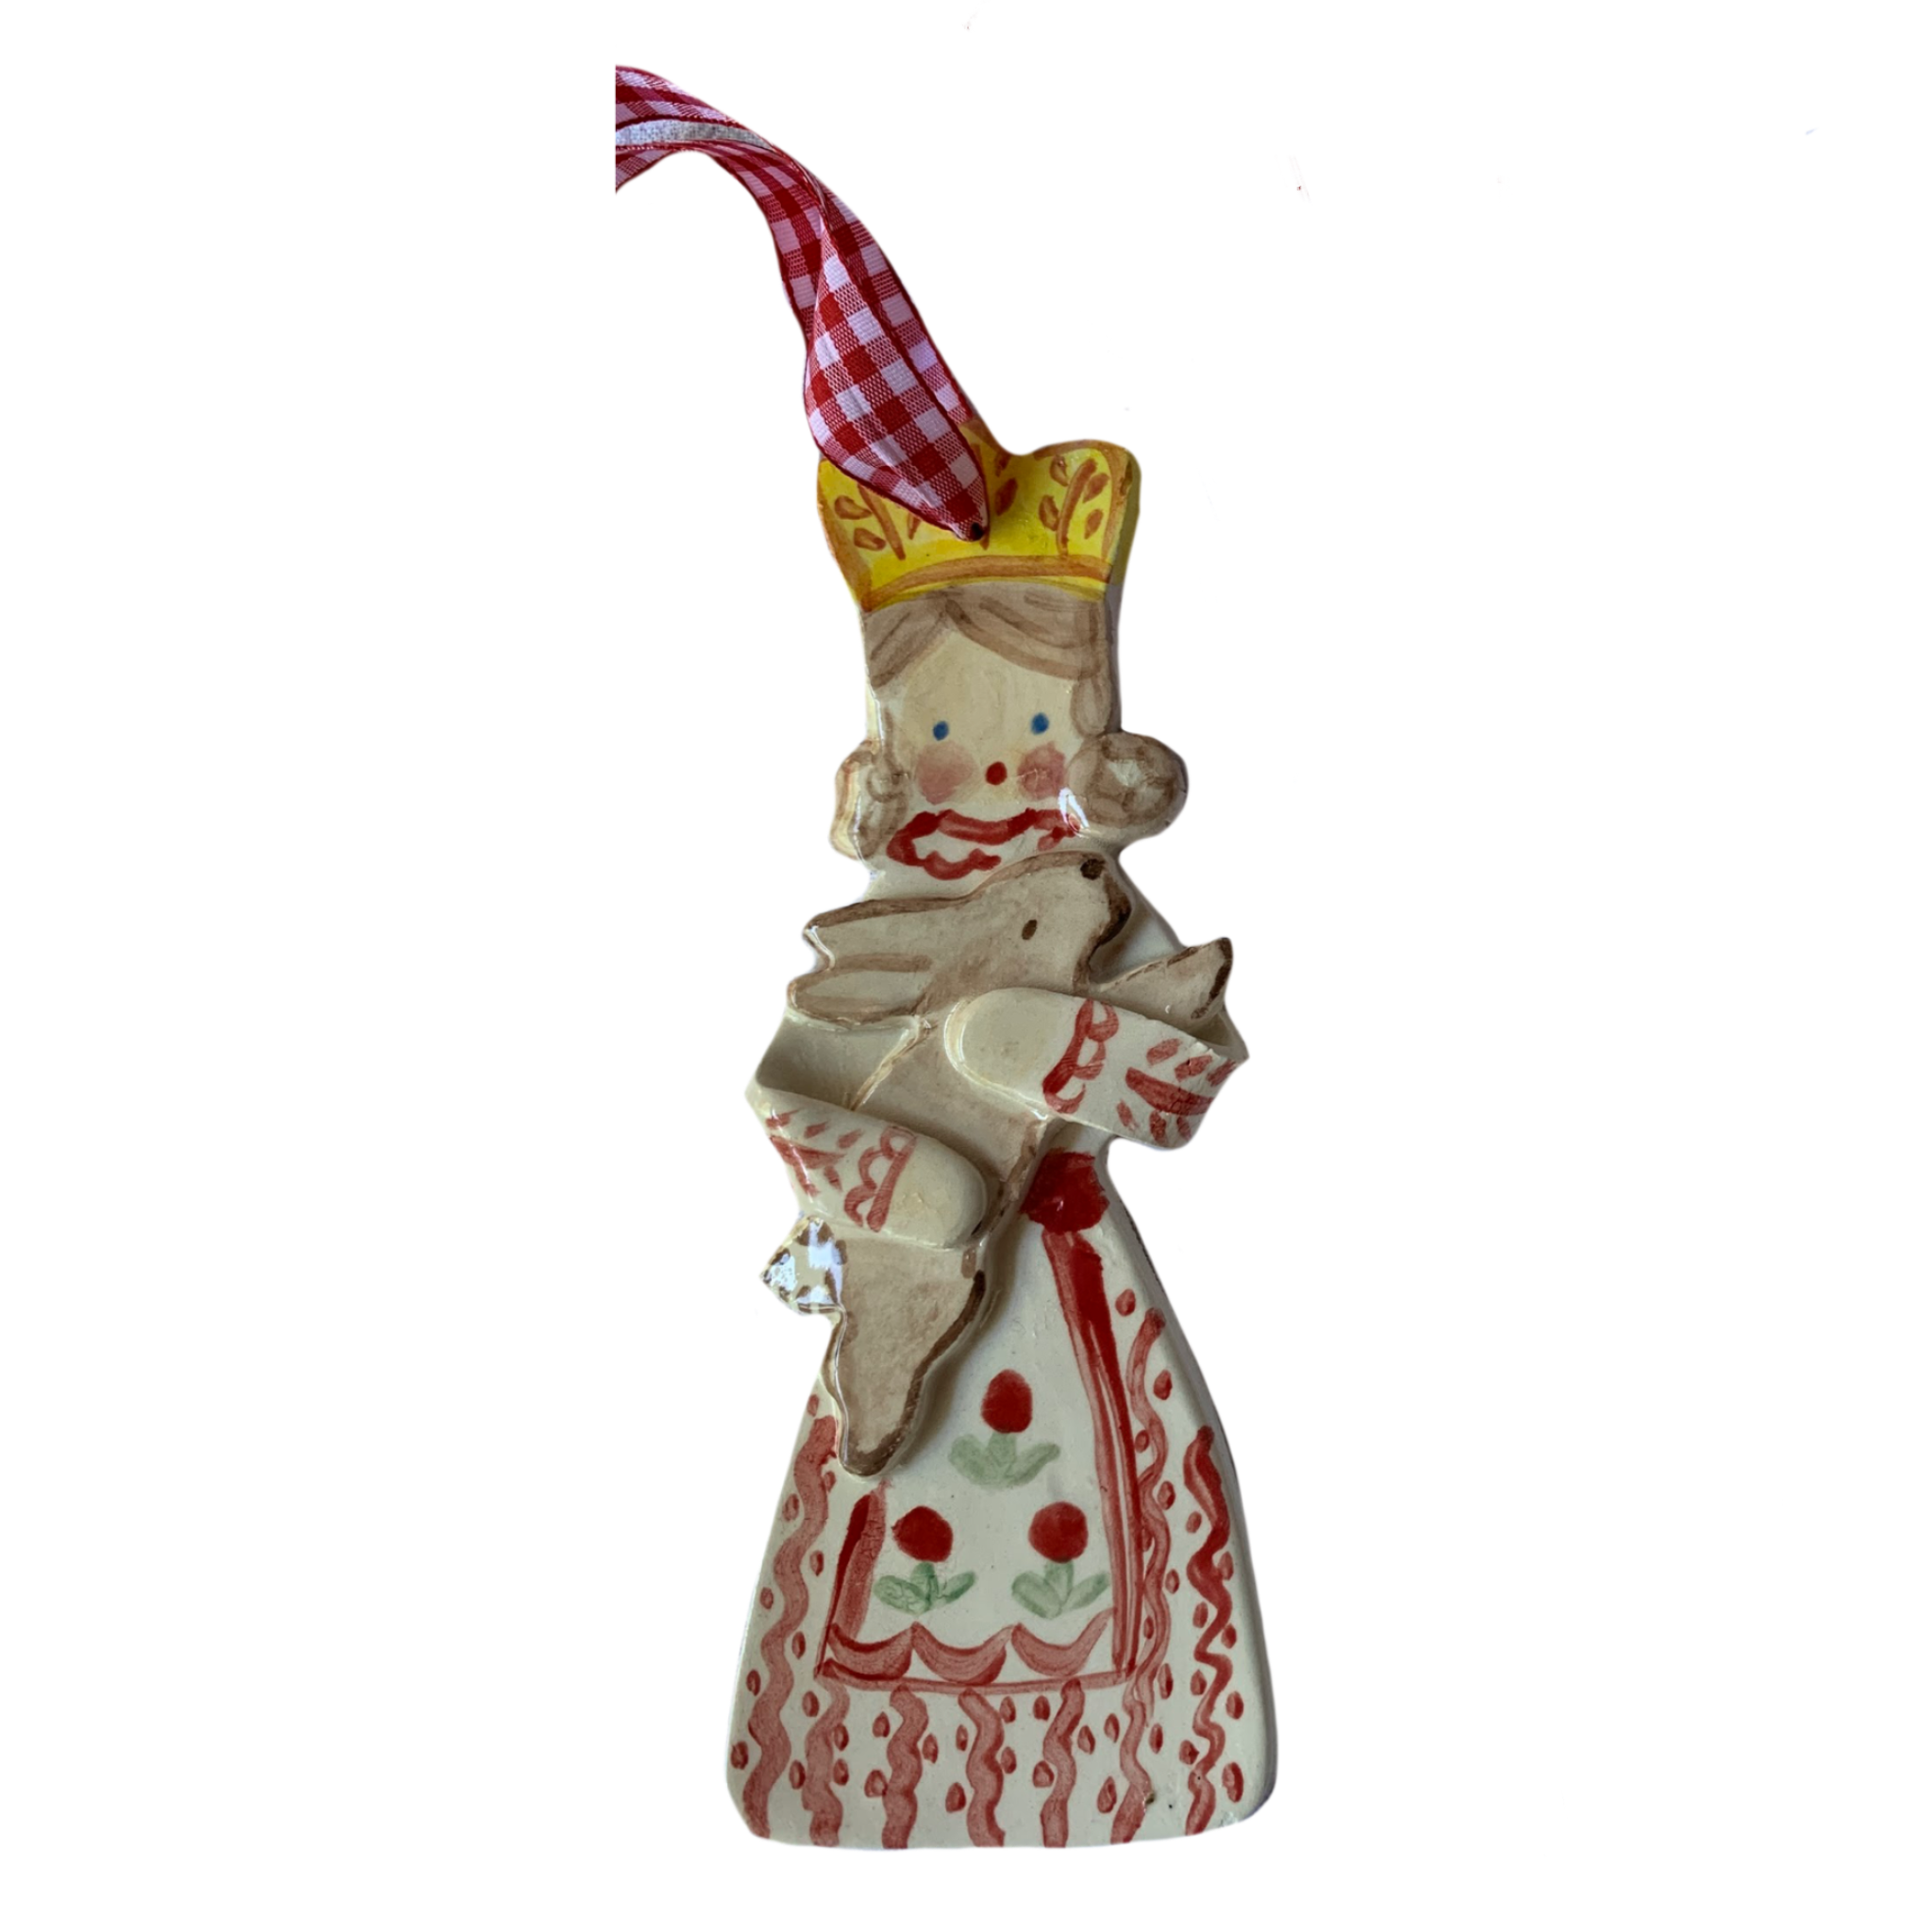 Tall Girl with Bunny ornament - Tricia Lowenfield Design